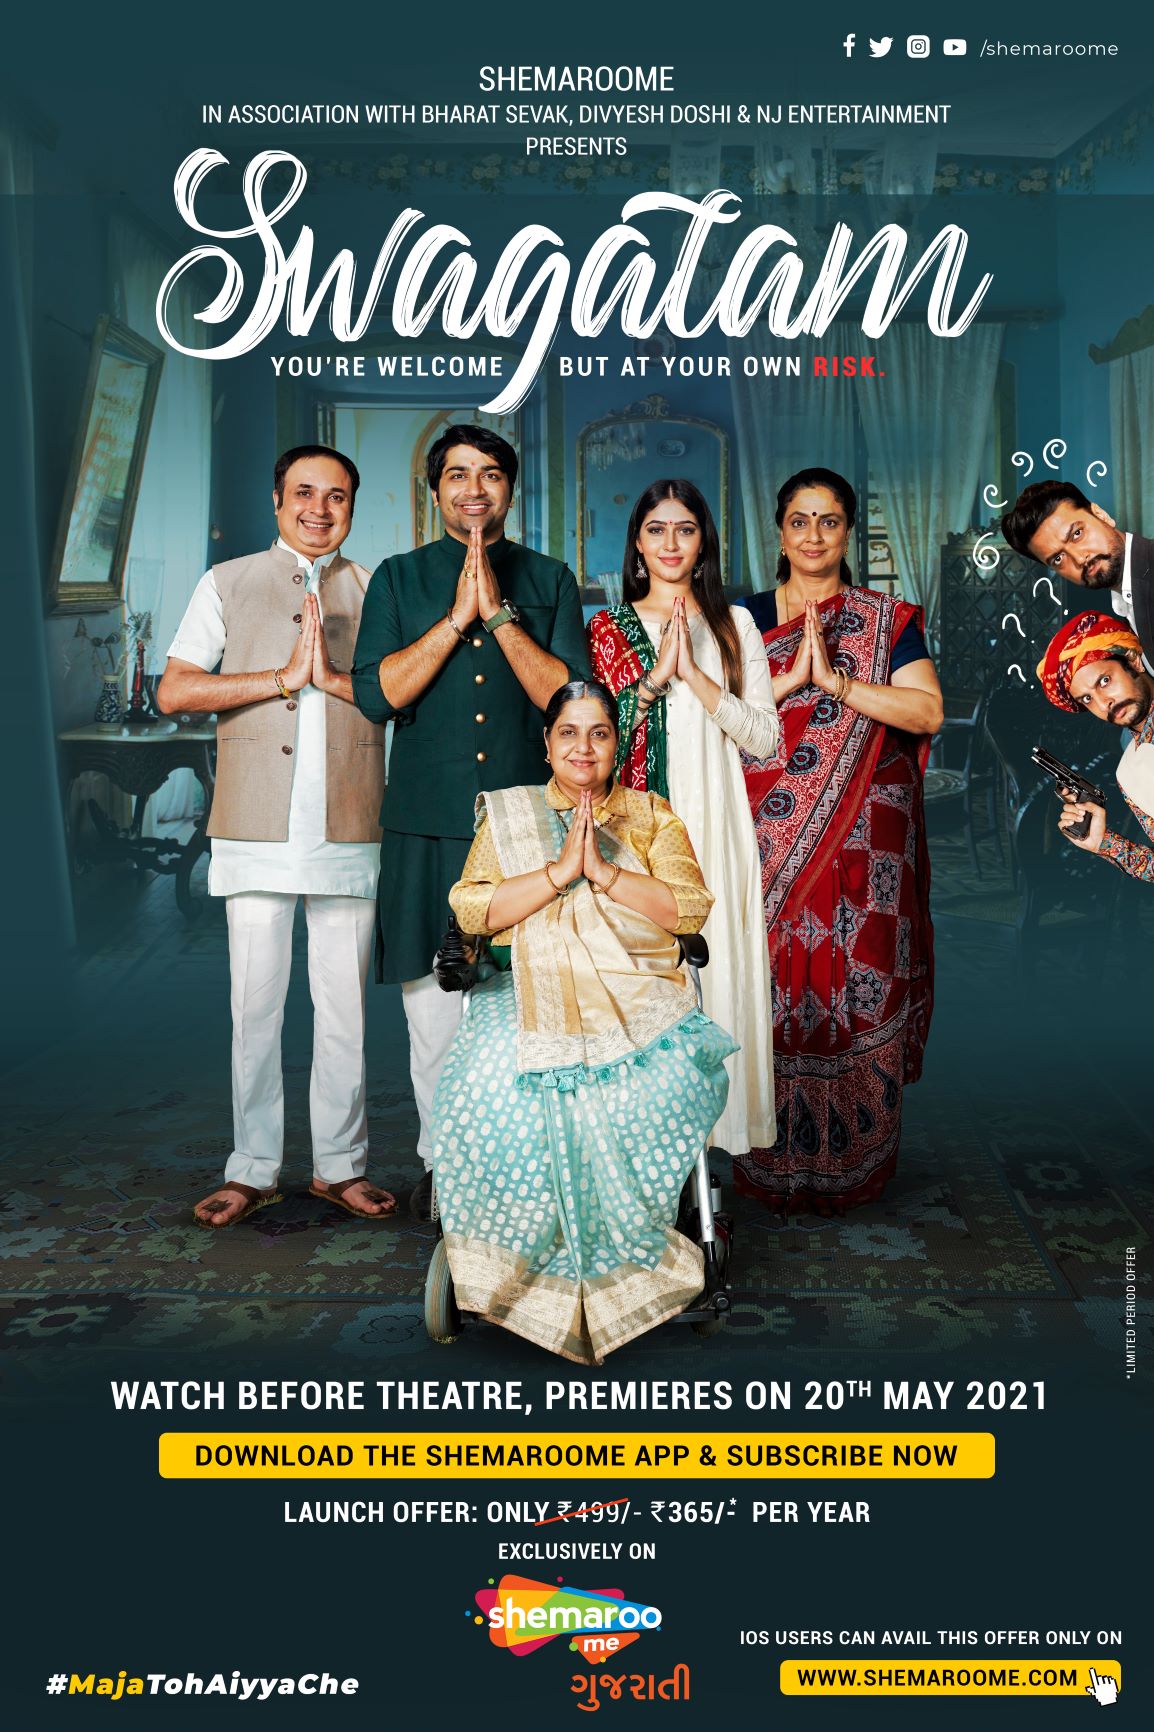 Gujarati film Swagatam is all set to release on ShemarooMe